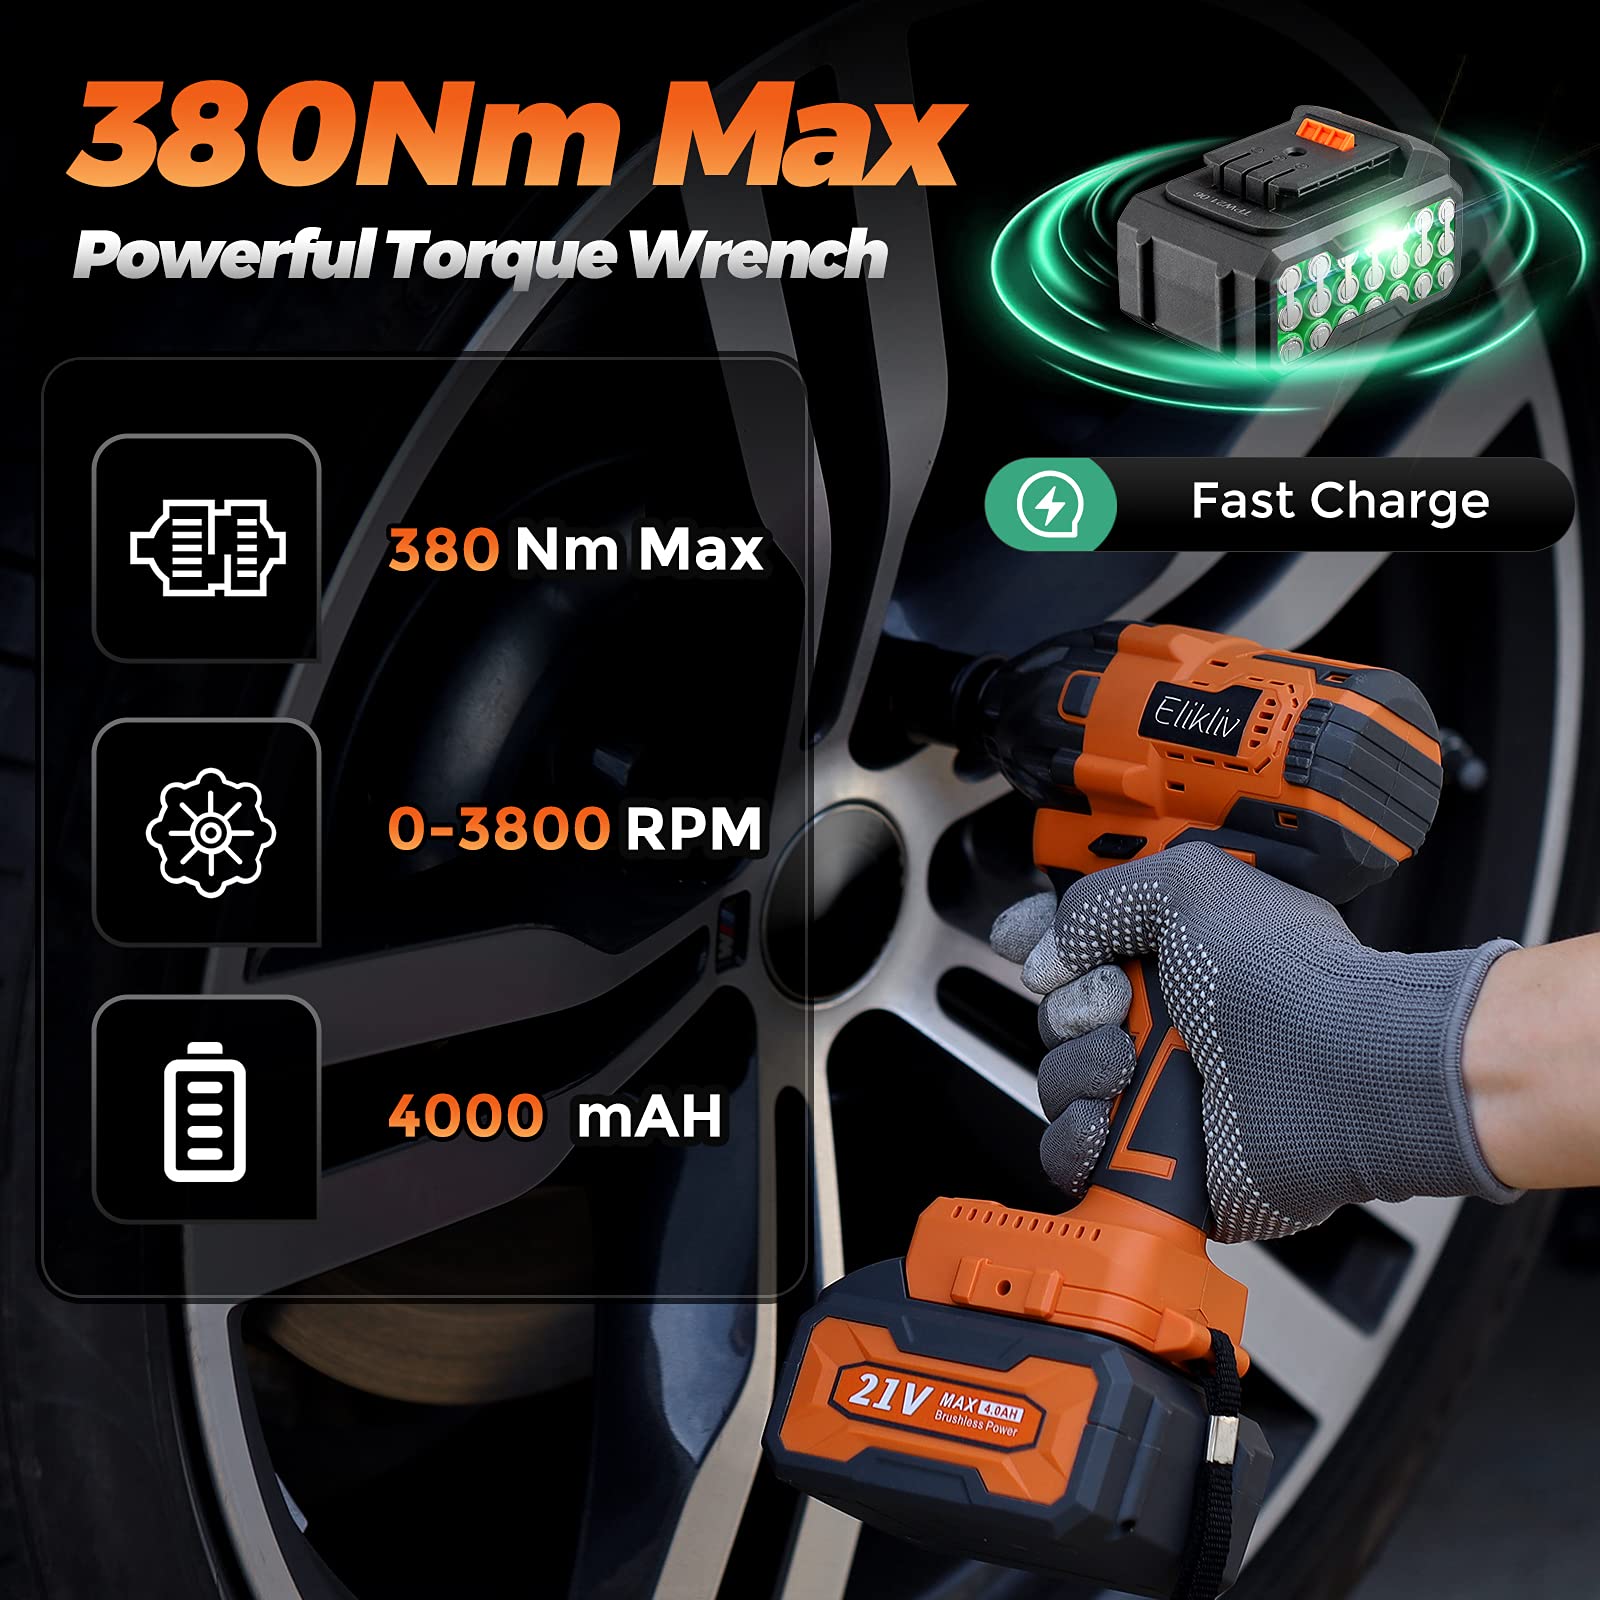 Elikliv Cordless Impact Wrench 1/2", 21V 4.0Ah 380Nm Power Impact Gun with 2pcs Battery, Charger, 6pcs Sockets, 14pcs Driver and Drill Bits - 3800 RPM Impact Driver for Car (Most Japanese Cars)